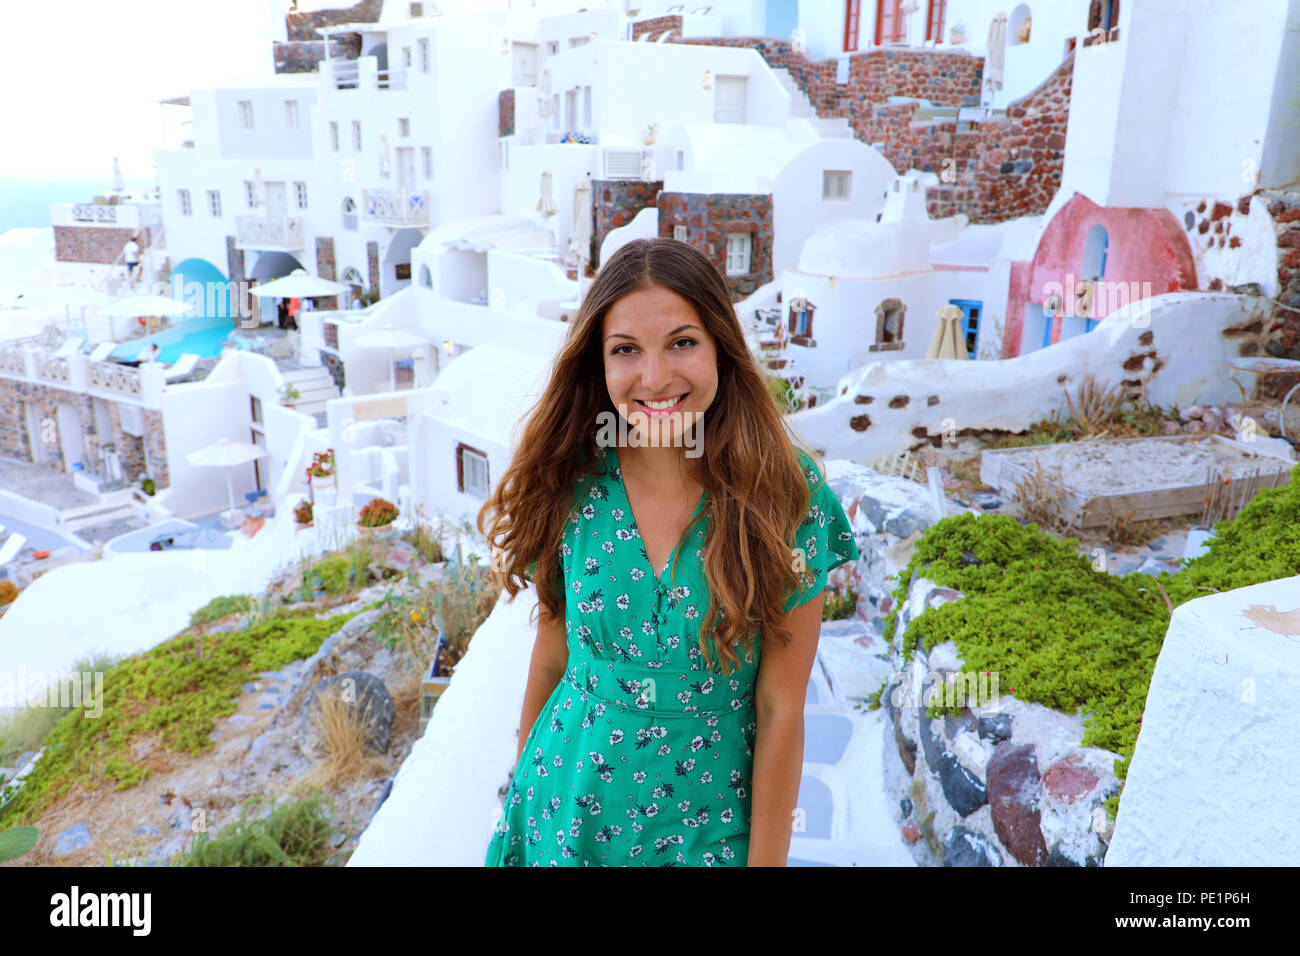 Santorini travel tourist woman visiting famous white village of Oia. Smiling tanned girl in green dress climbs the stairs in Santorini, Cyclades, Gree Stock Photo